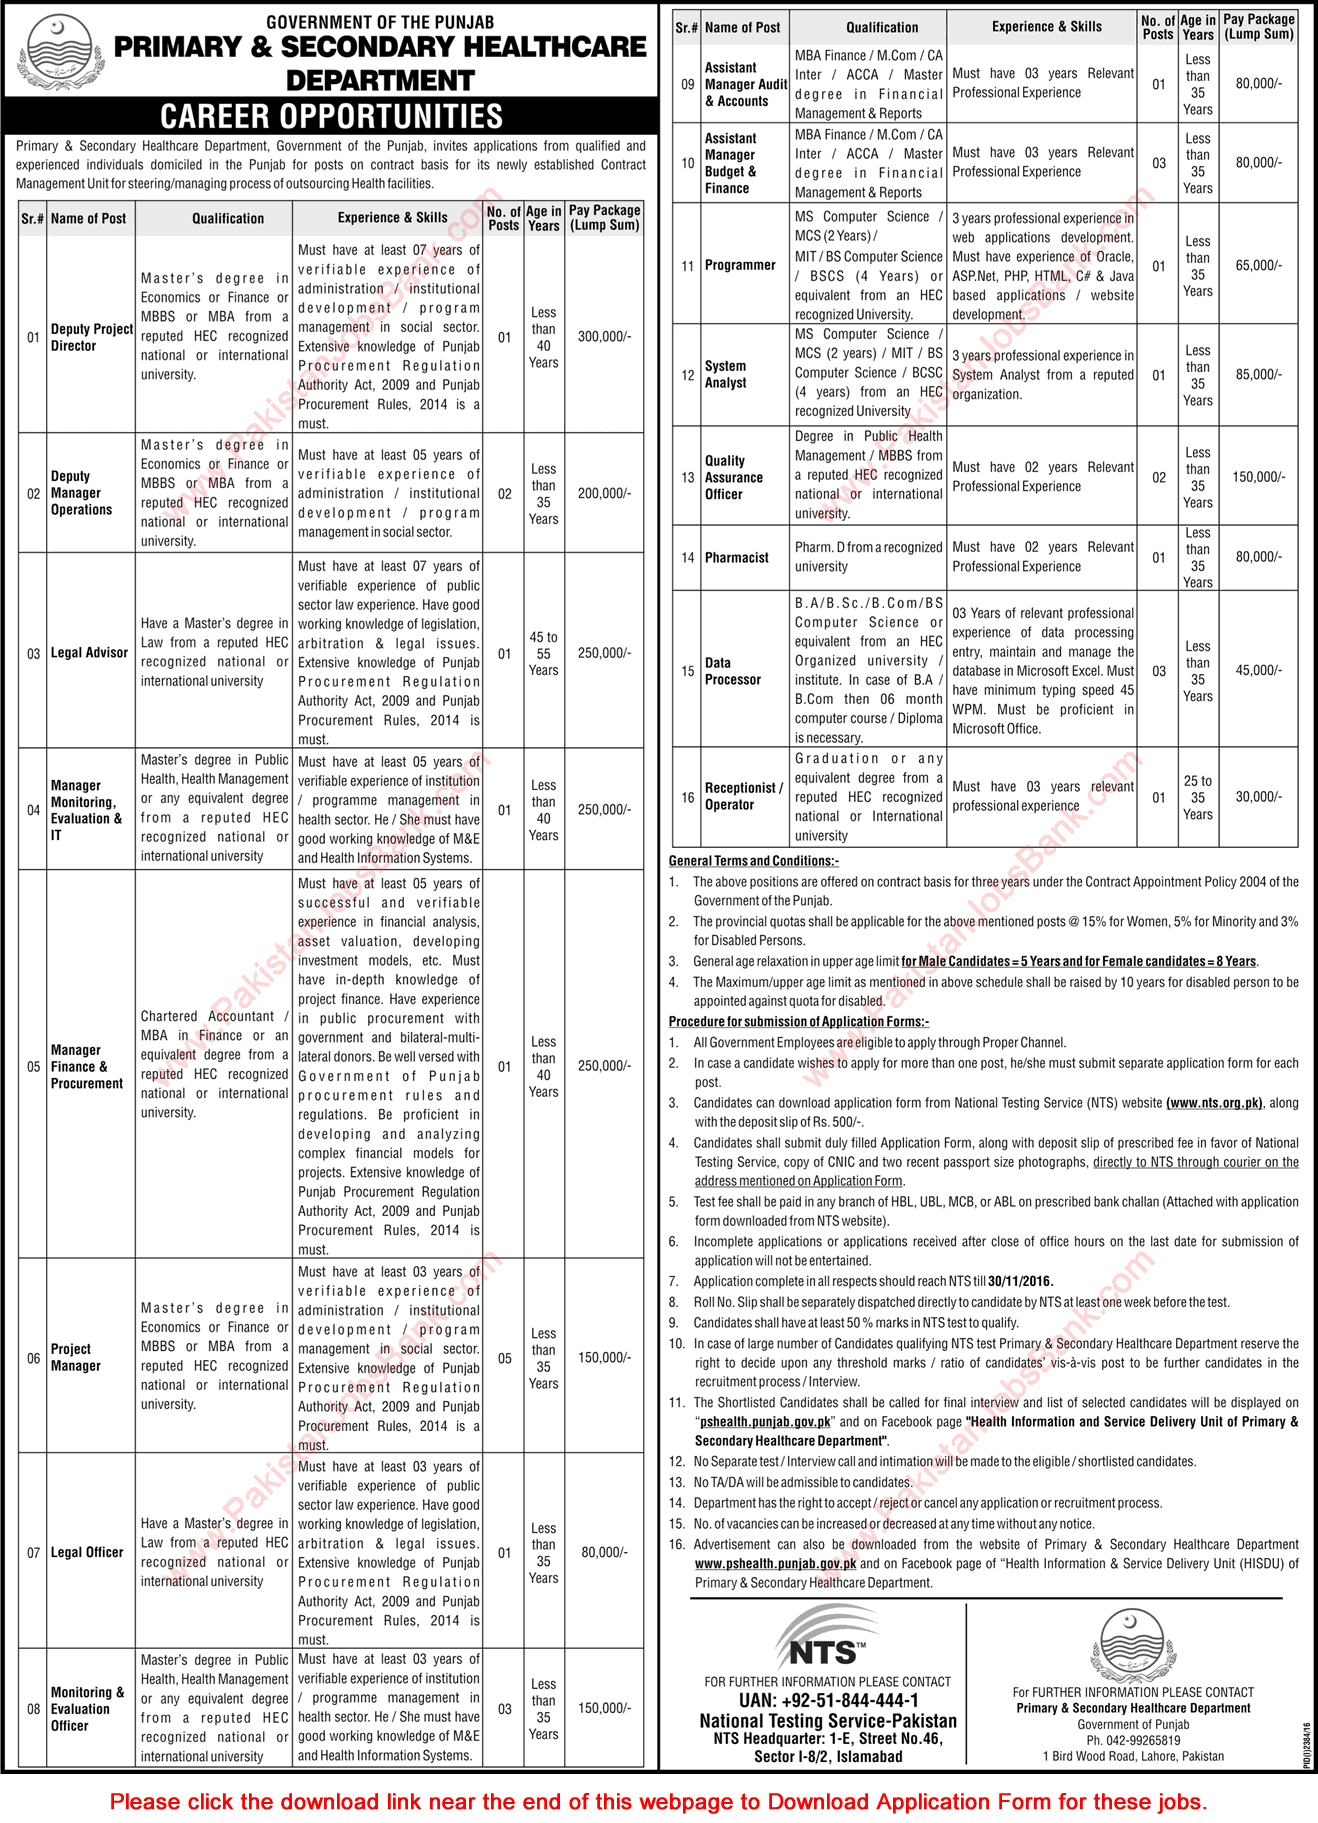 Primary and Secondary Healthcare Department Punjab Jobs November 2016 NTS Application Form Latest